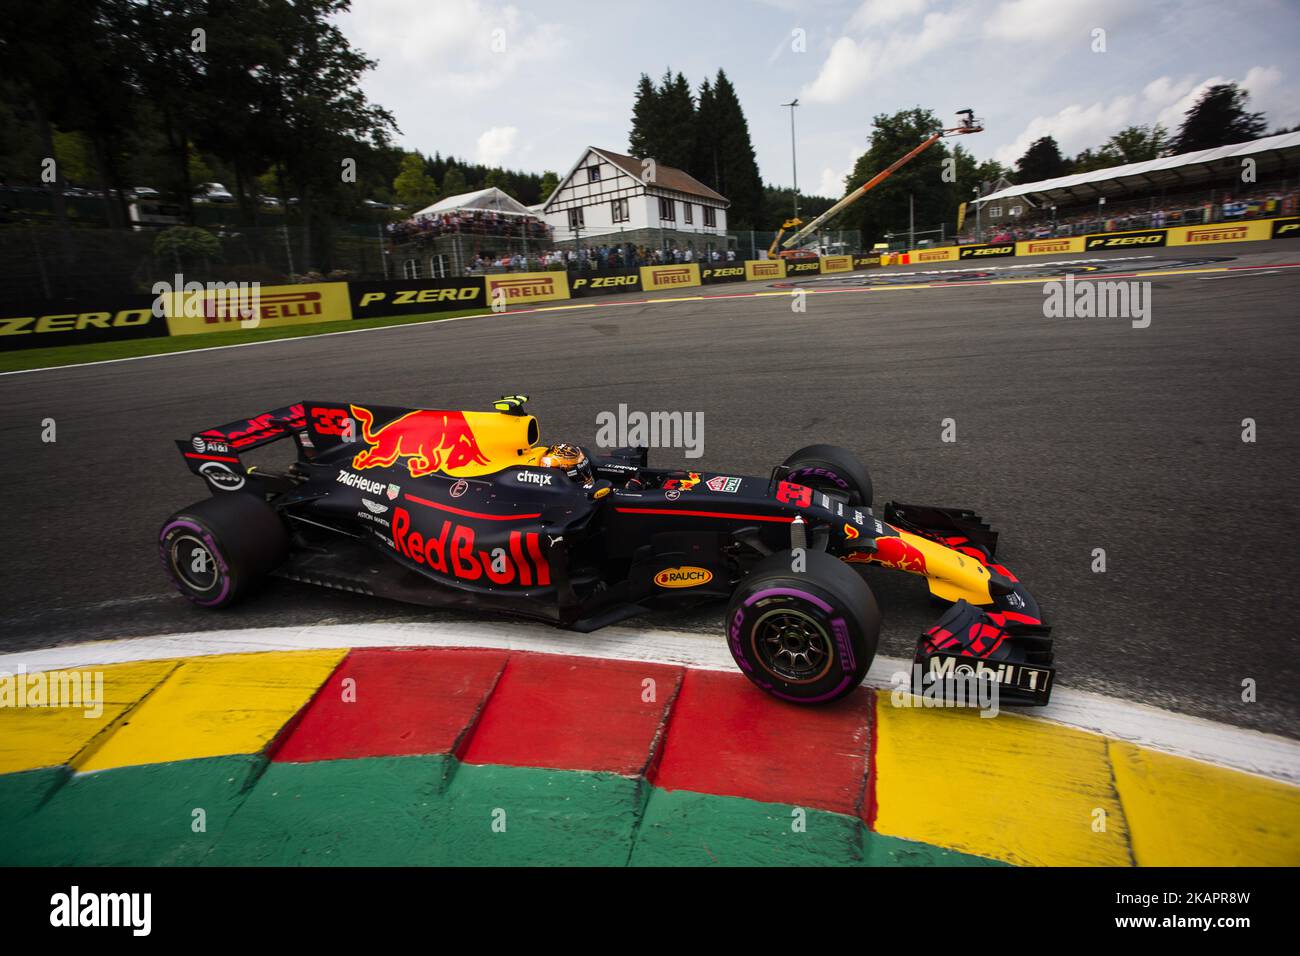 33 VERSTAPPEN Max from Nederlans of Red Bull Tag Heuer during the Qualifying of Formula One Belgian Grand Prix at Circuit de Spa-Francorchamps on August 25, 2017 in Spa, Belgium. (Photo by Xavier Bonilla/NurPhoto) Stock Photo